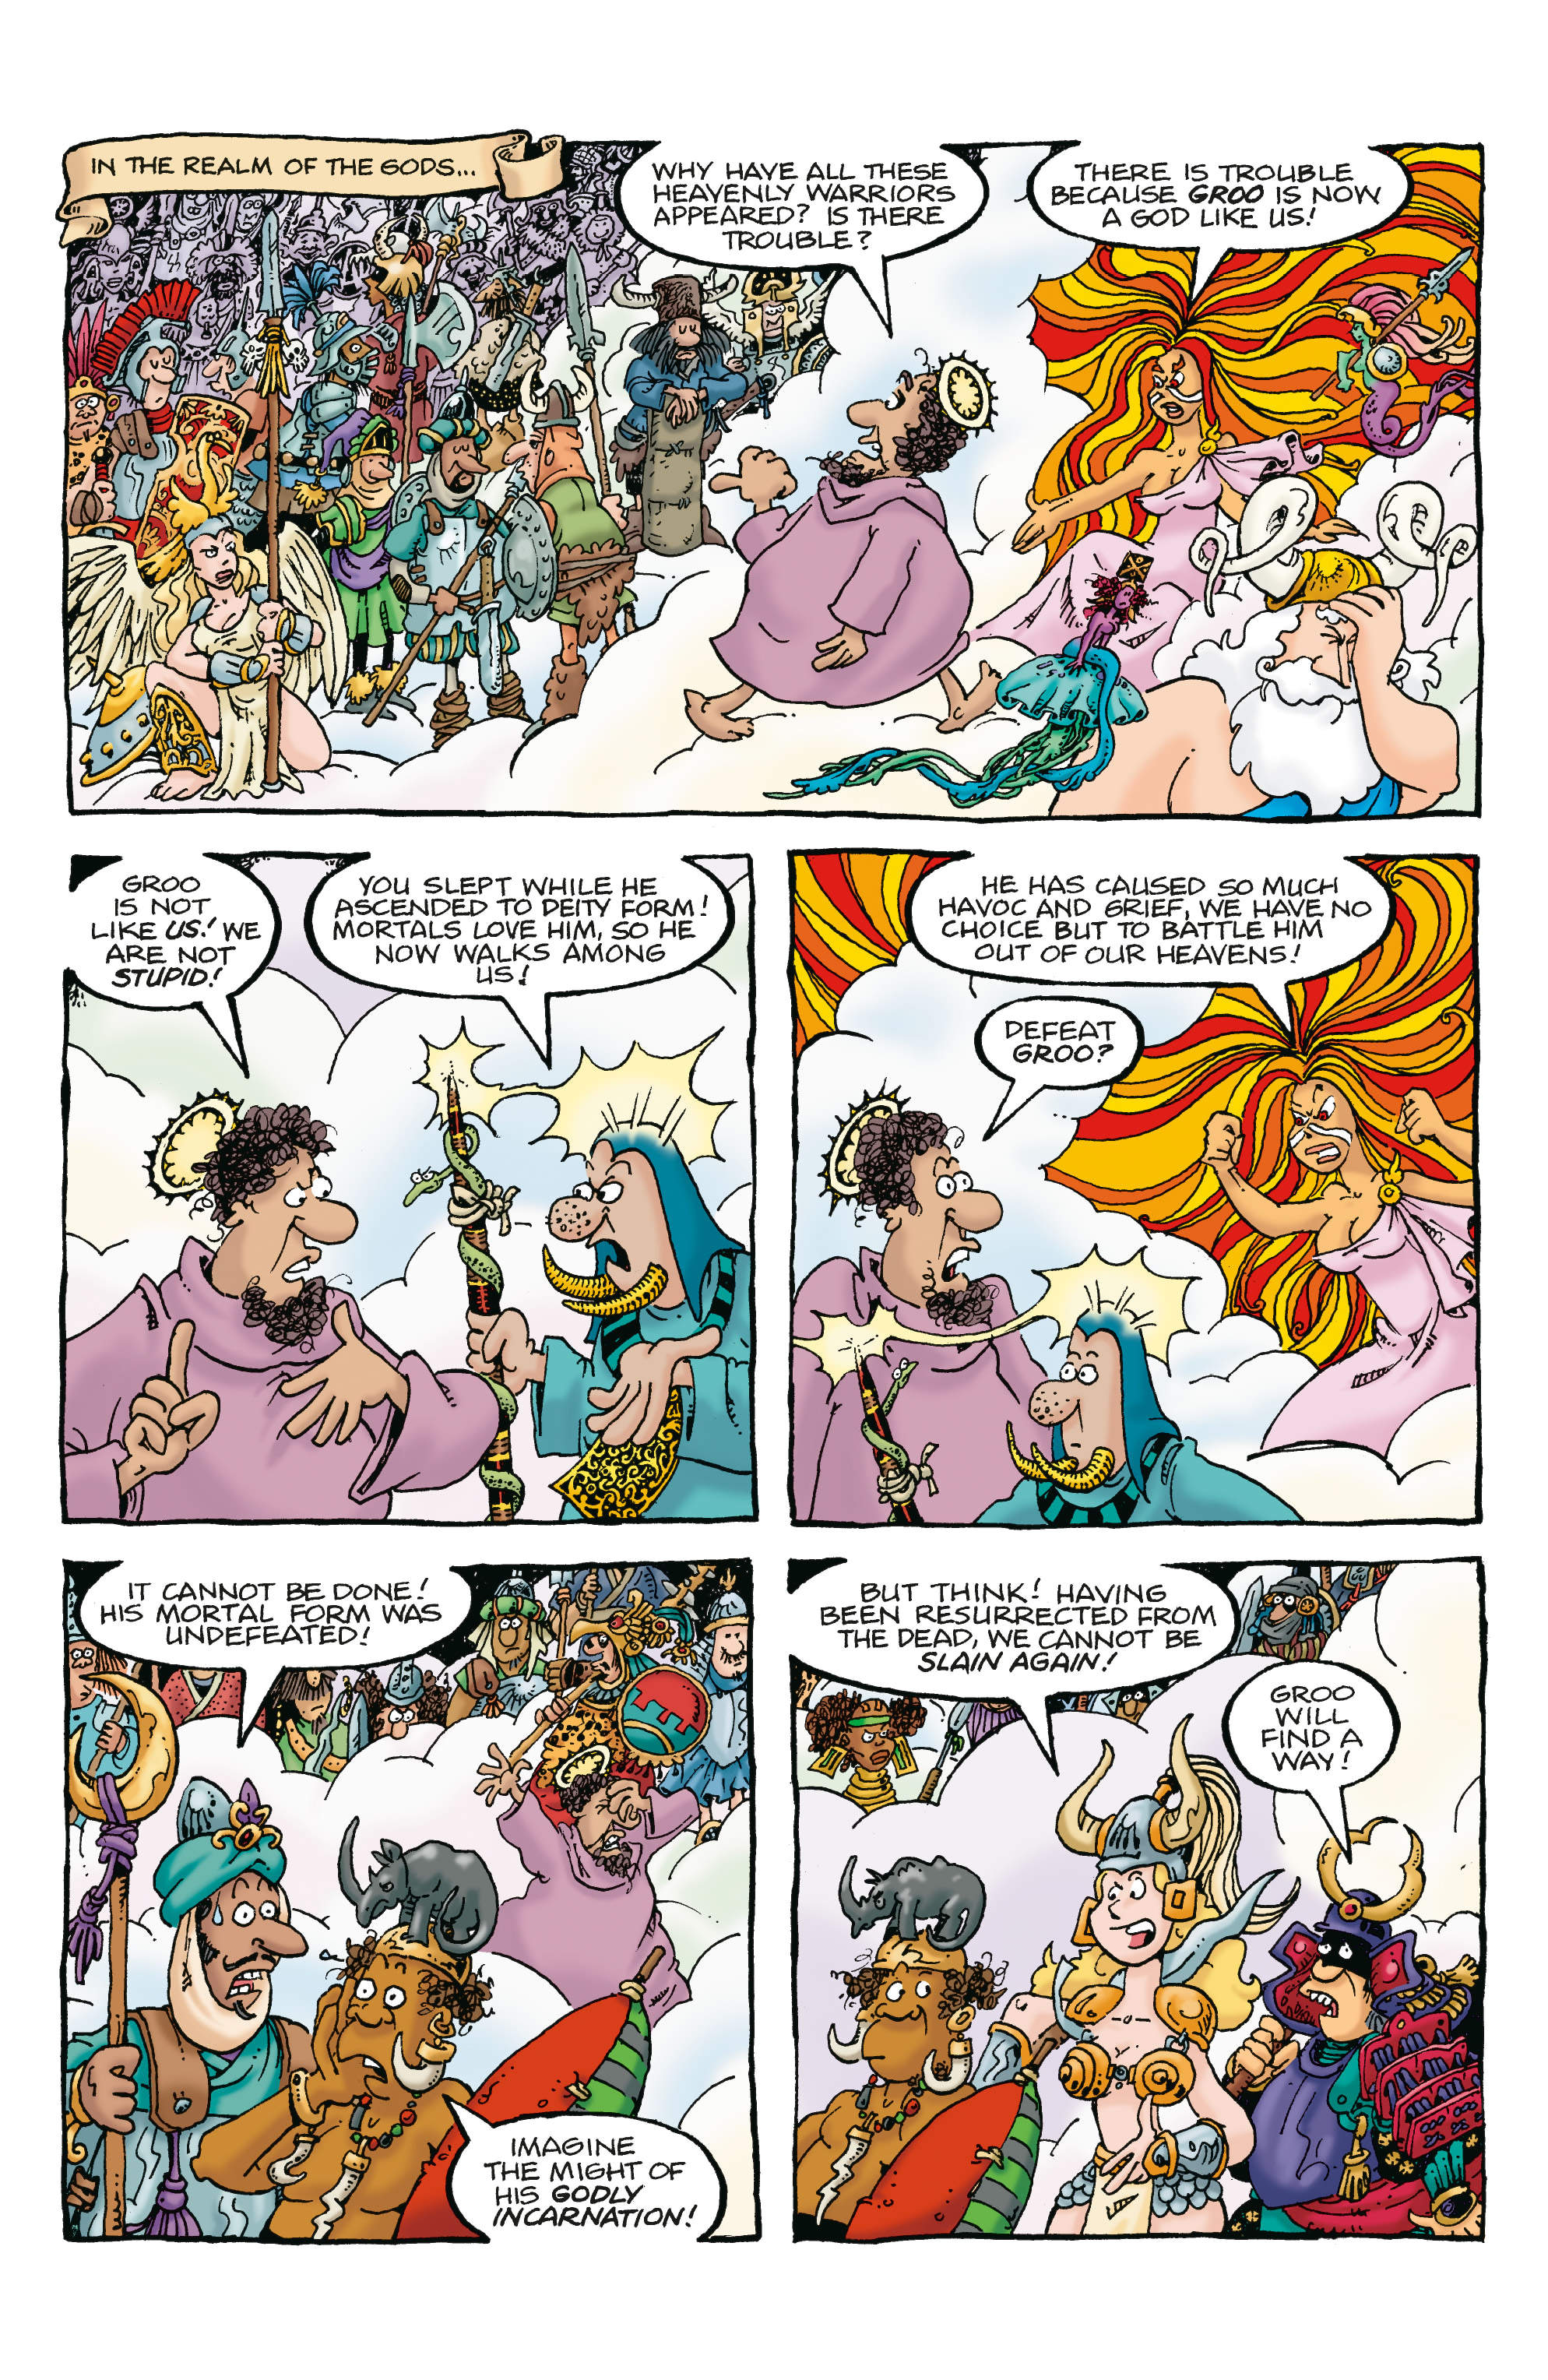 Groo: Gods Against Groo (2022-): Chapter 2 - Page 3